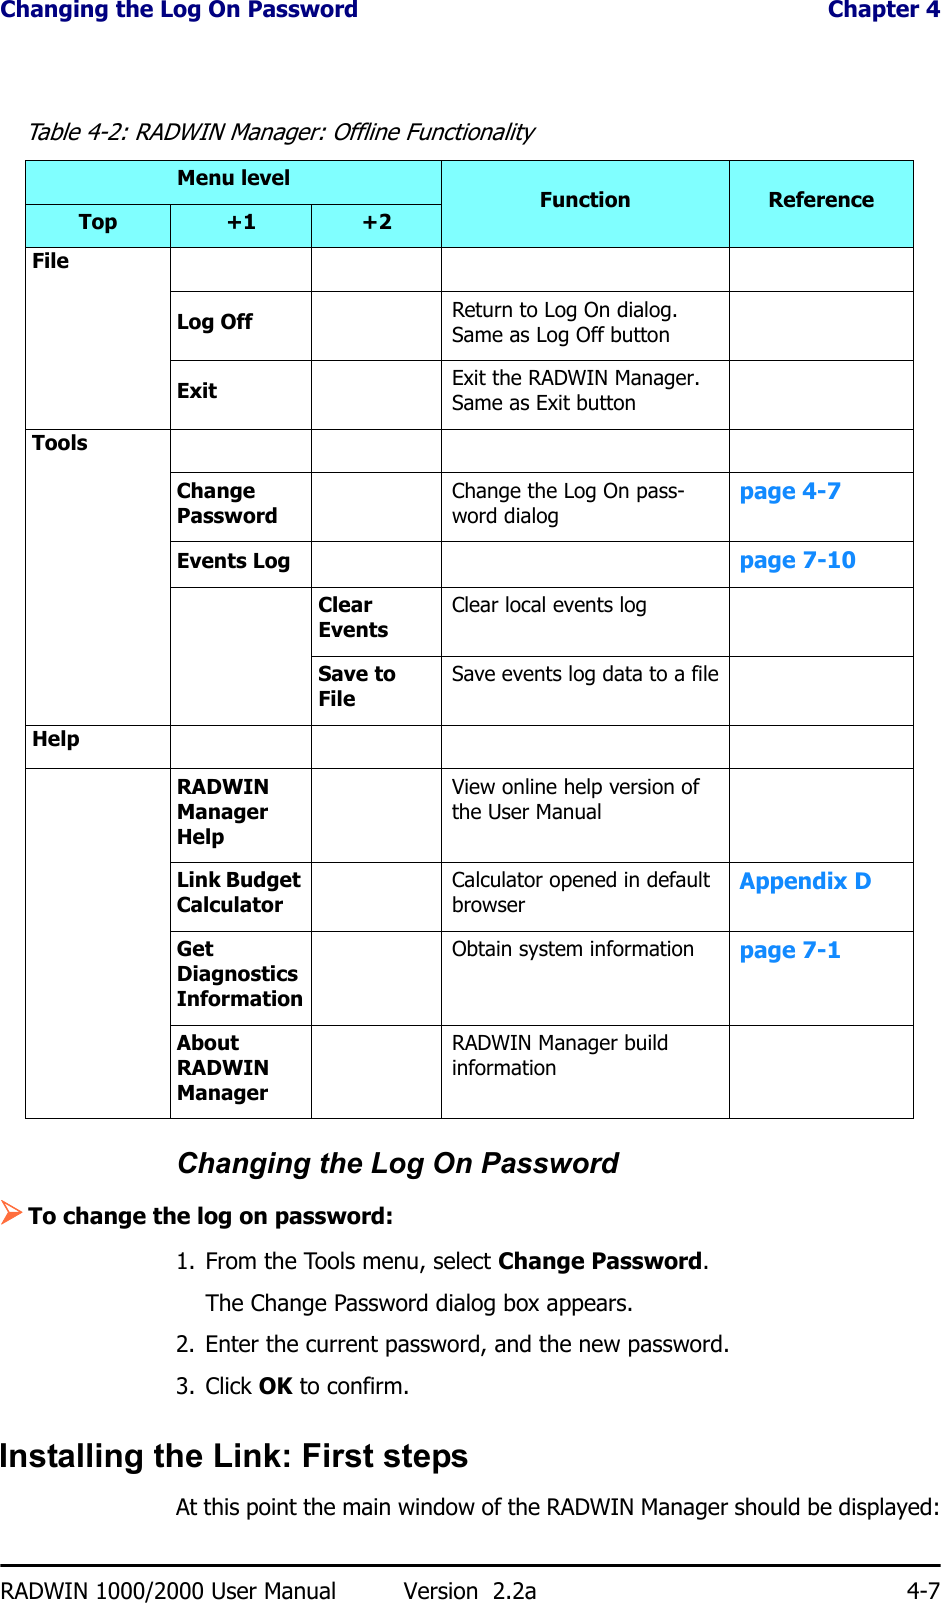 Changing the Log On Password  Chapter 4RADWIN 1000/2000 User Manual Version  2.2a 4-7Changing the Log On Password¾To change the log on password:1. From the Tools menu, select Change Password.The Change Password dialog box appears.2. Enter the current password, and the new password.3. Click OK to confirm.Installing the Link: First stepsAt this point the main window of the RADWIN Manager should be displayed:Table 4-2: RADWIN Manager: Offline FunctionalityMenu levelFunction ReferenceTop +1 +2FileLog Off Return to Log On dialog. Same as Log Off buttonExit Exit the RADWIN Manager. Same as Exit buttonToolsChange PasswordChange the Log On pass-word dialog page 4-7Events Log page 7-10Clear EventsClear local events logSave to FileSave events log data to a fileHelpRADWIN Manager HelpView online help version of the User ManualLink Budget CalculatorCalculator opened in default browser Appendix DGet Diagnostics InformationObtain system information page 7-1About RADWIN ManagerRADWIN Manager build information